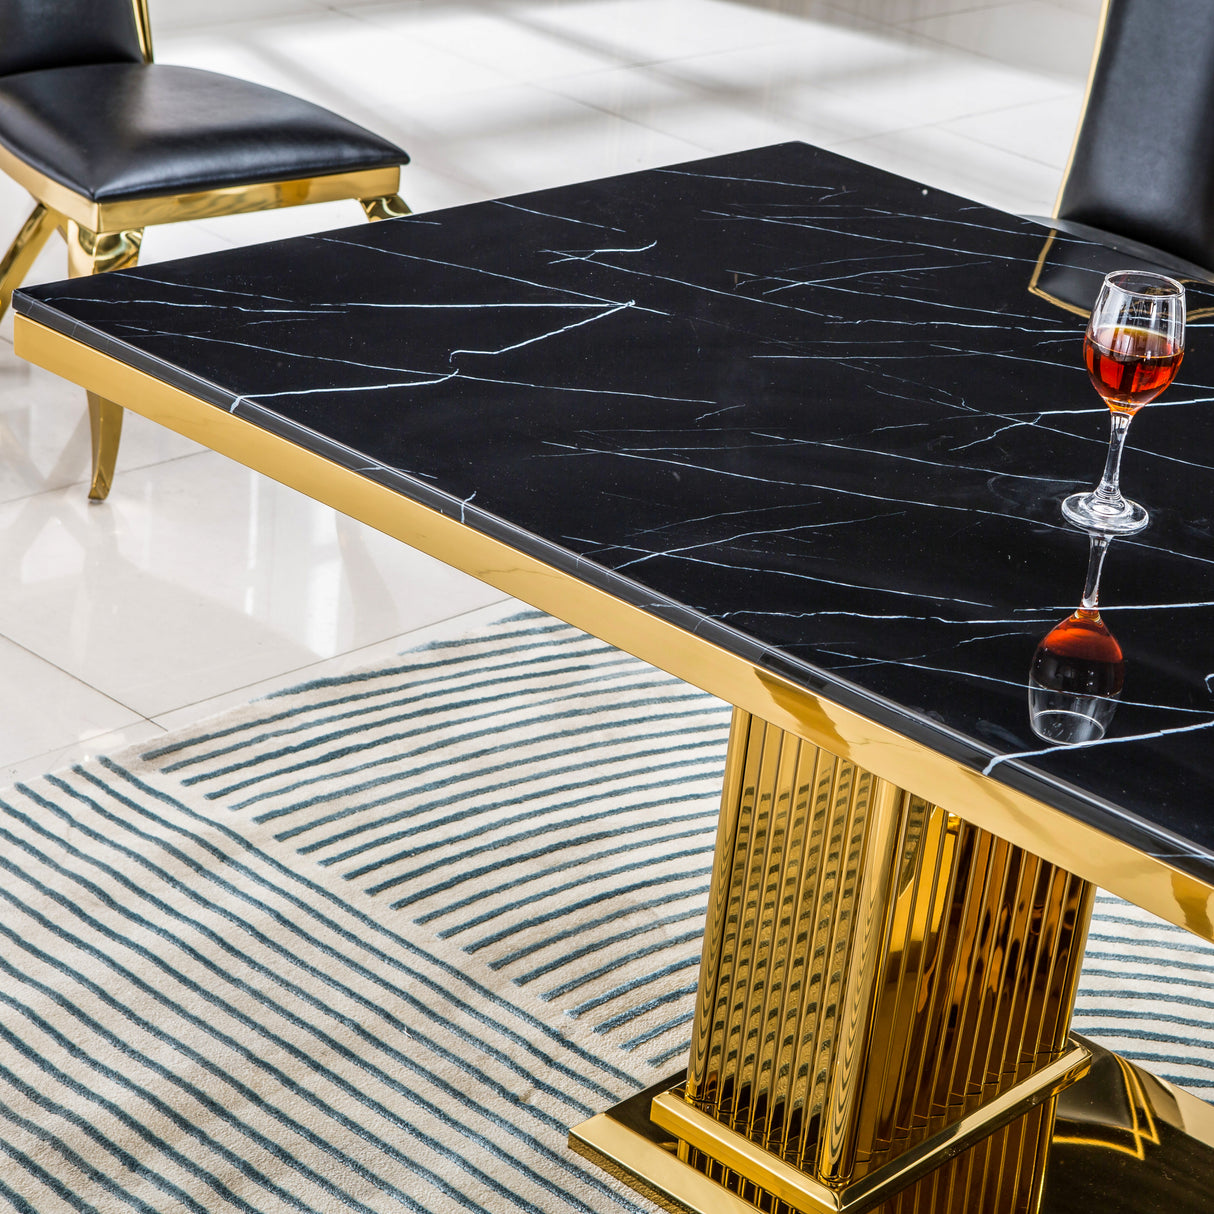 Modern Rectangular Marble Dining Table, 0.71" Thick Marble Top, Double Pedestal Pillar Stainless Steel Base with Gold Mirrored Finish(Not Including Chairs) - Home Elegance USA